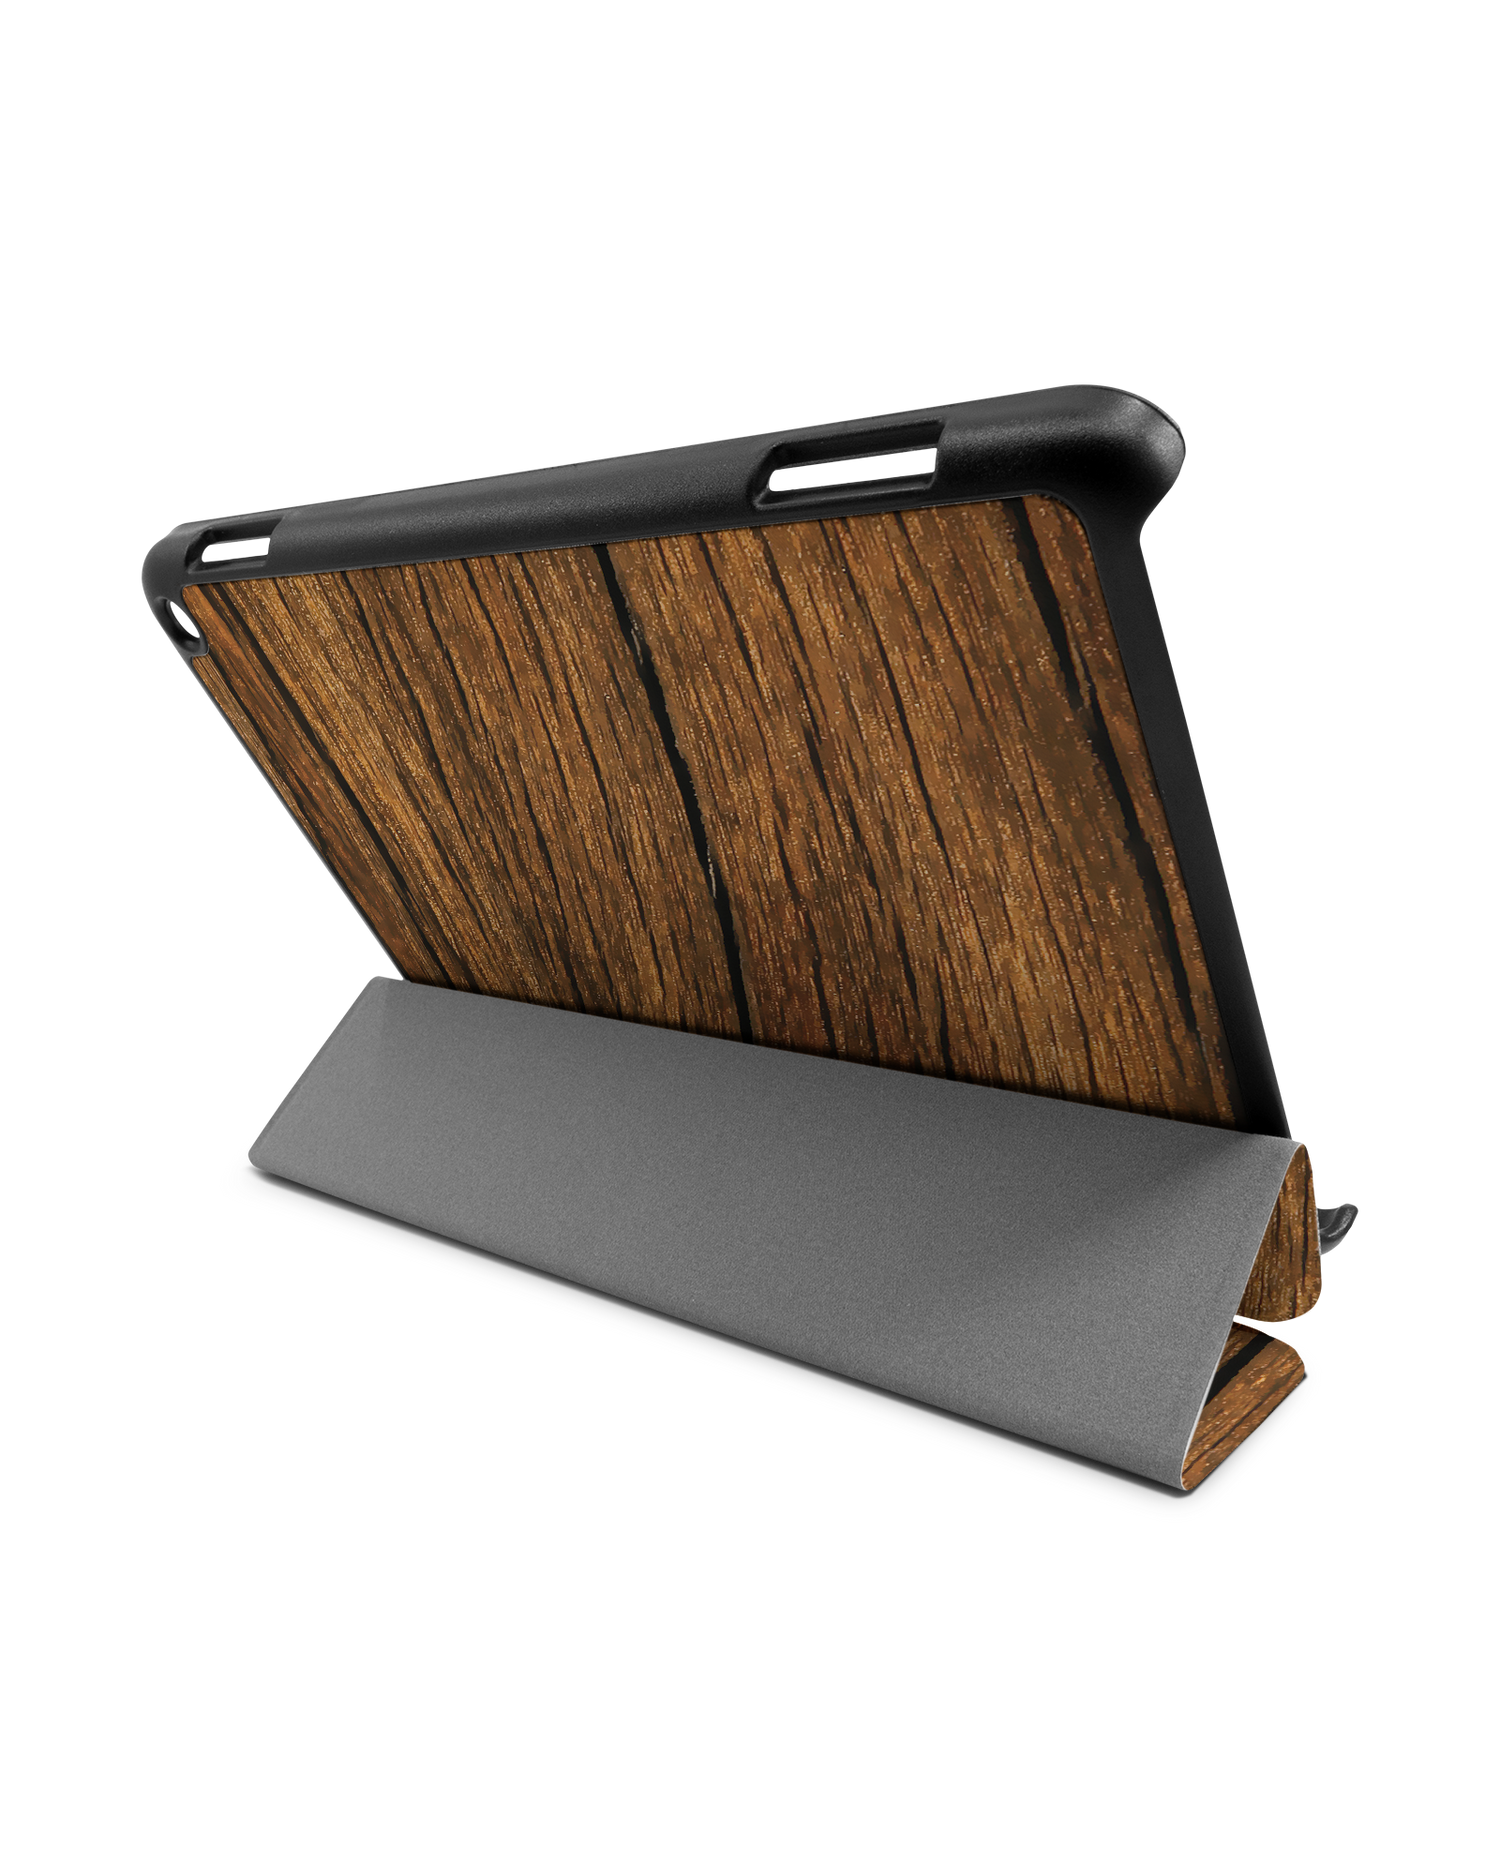 Wood Tablet Smart Case for Amazon Fire HD 8 (2022), Amazon Fire HD 8 Plus (2022), Amazon Fire HD 8 (2020), Amazon Fire HD 8 Plus (2020): Used as Stand